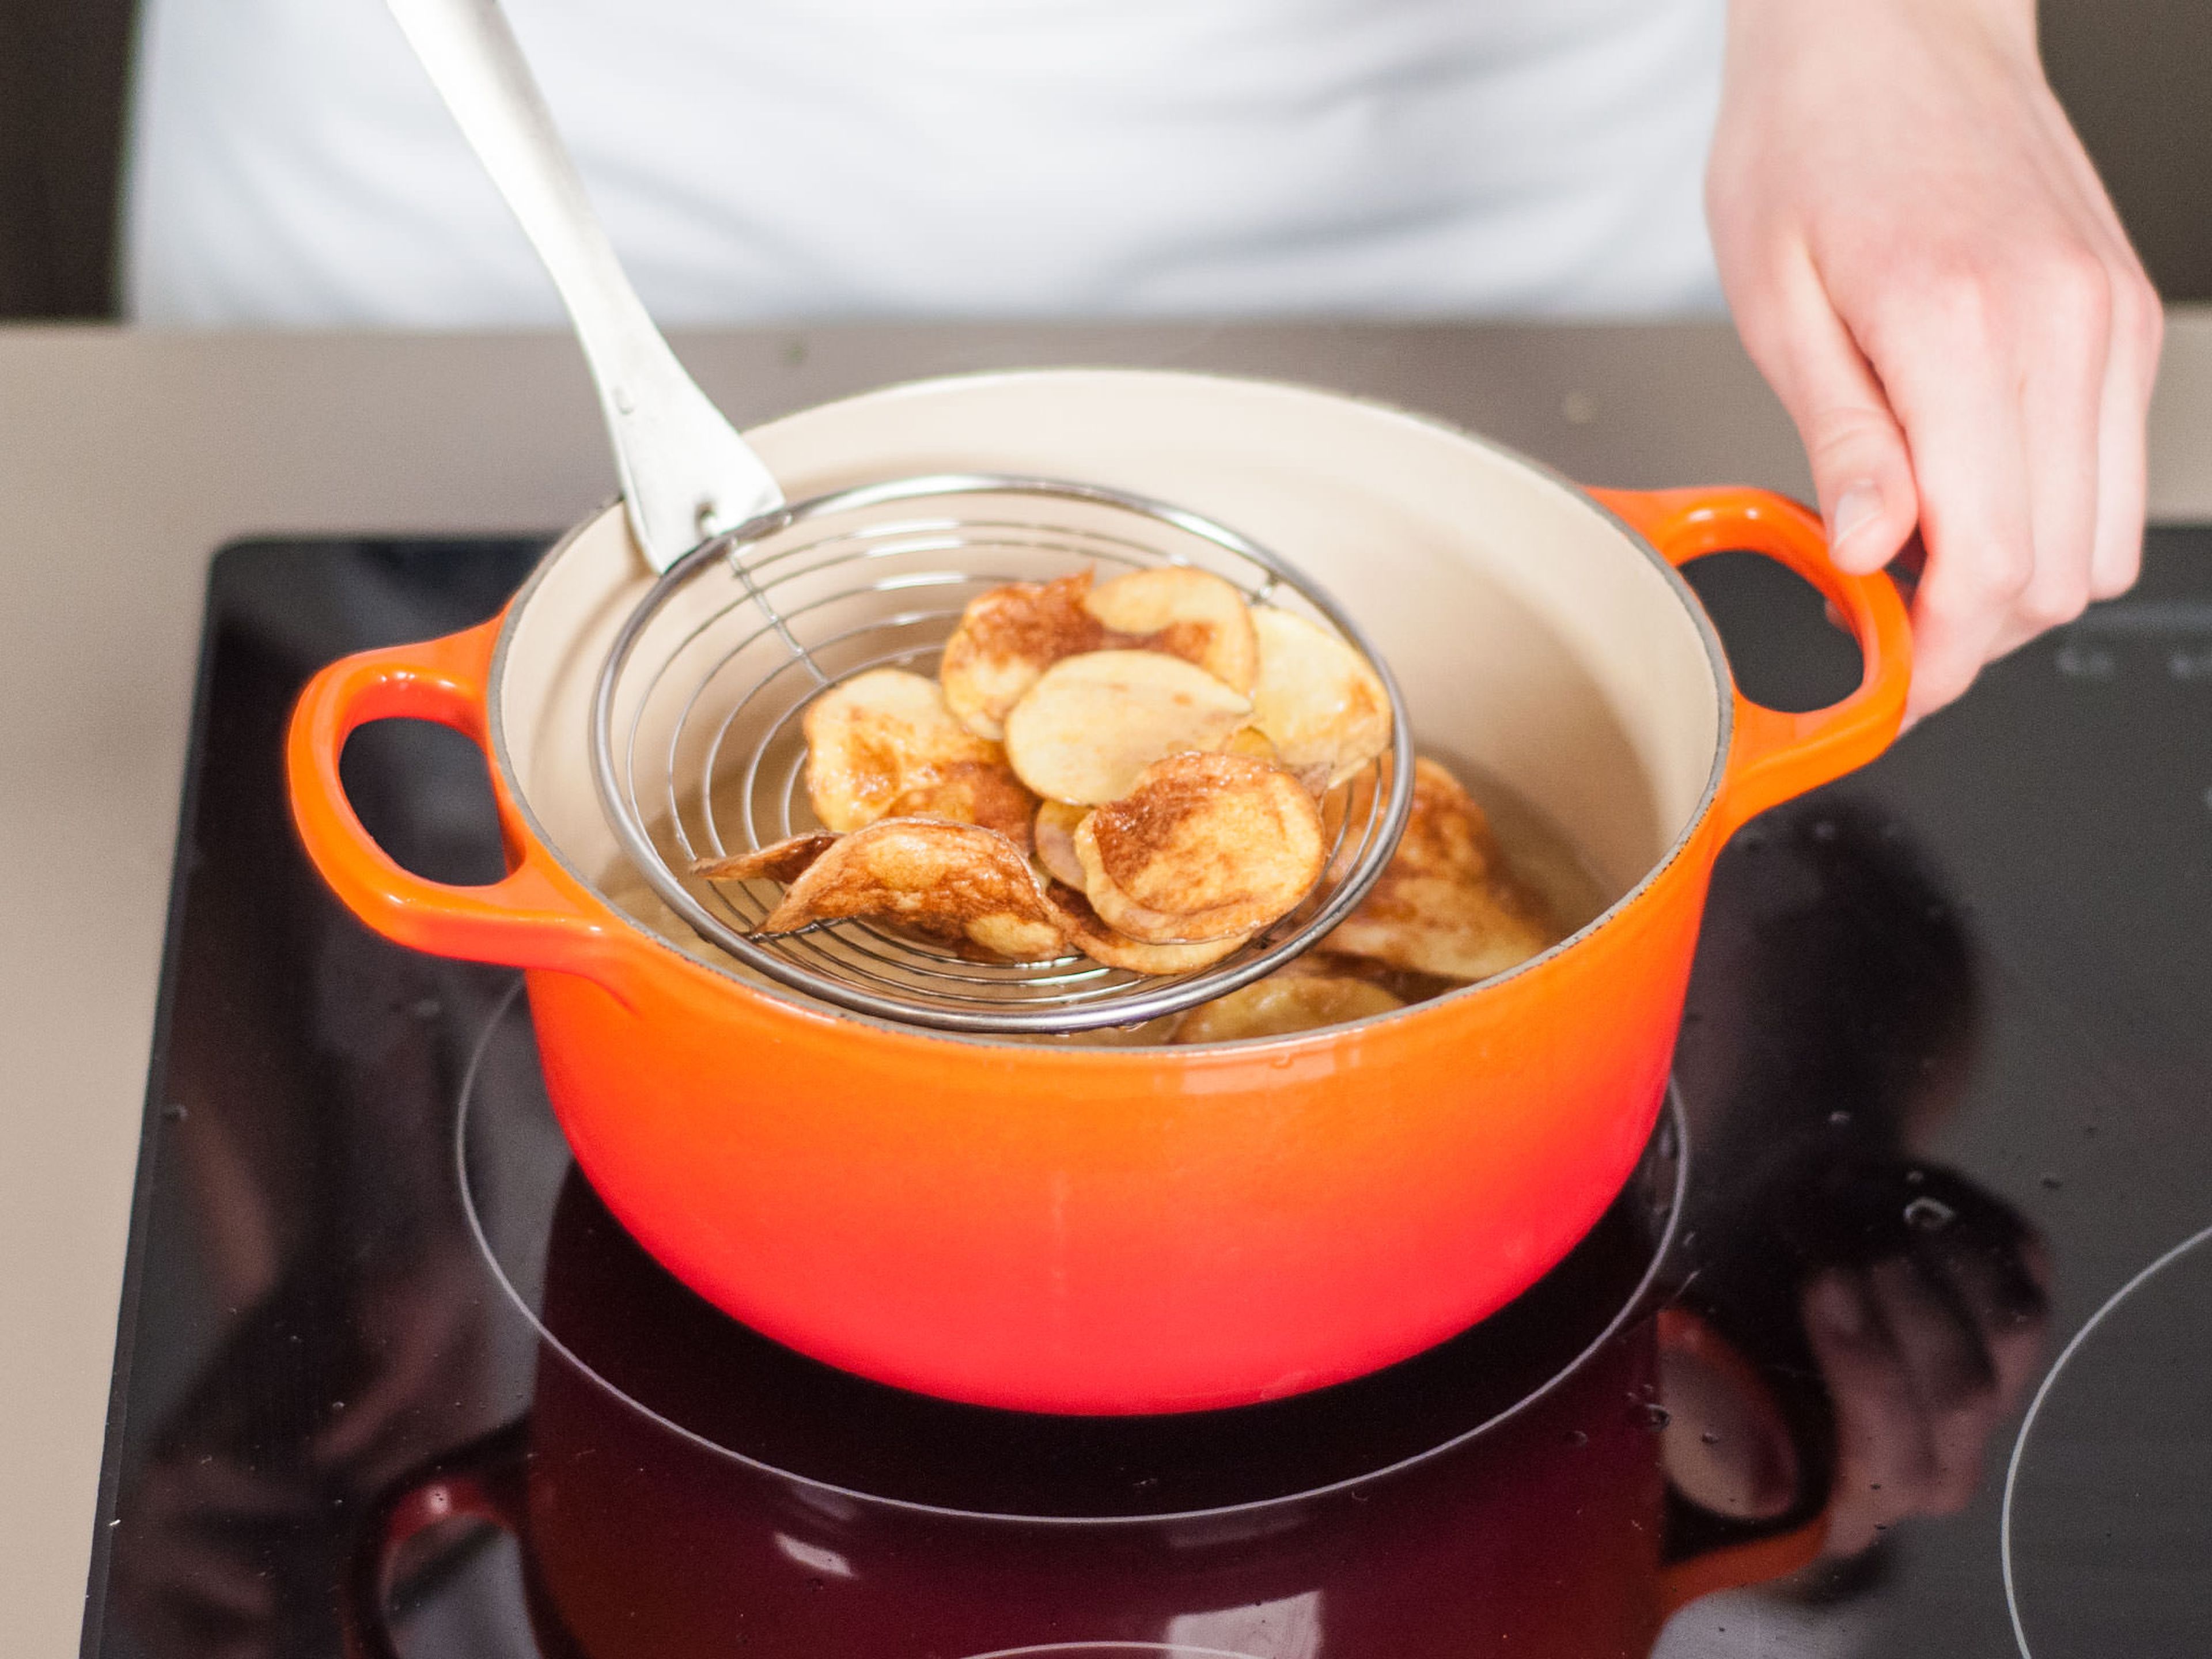 Heat a generous amount of vegetable oil into a small saucepan. Add potatoes and cook until golden, approx. 2 – 3 min. Remove from oil and transfer to a paper towel-lined plate.